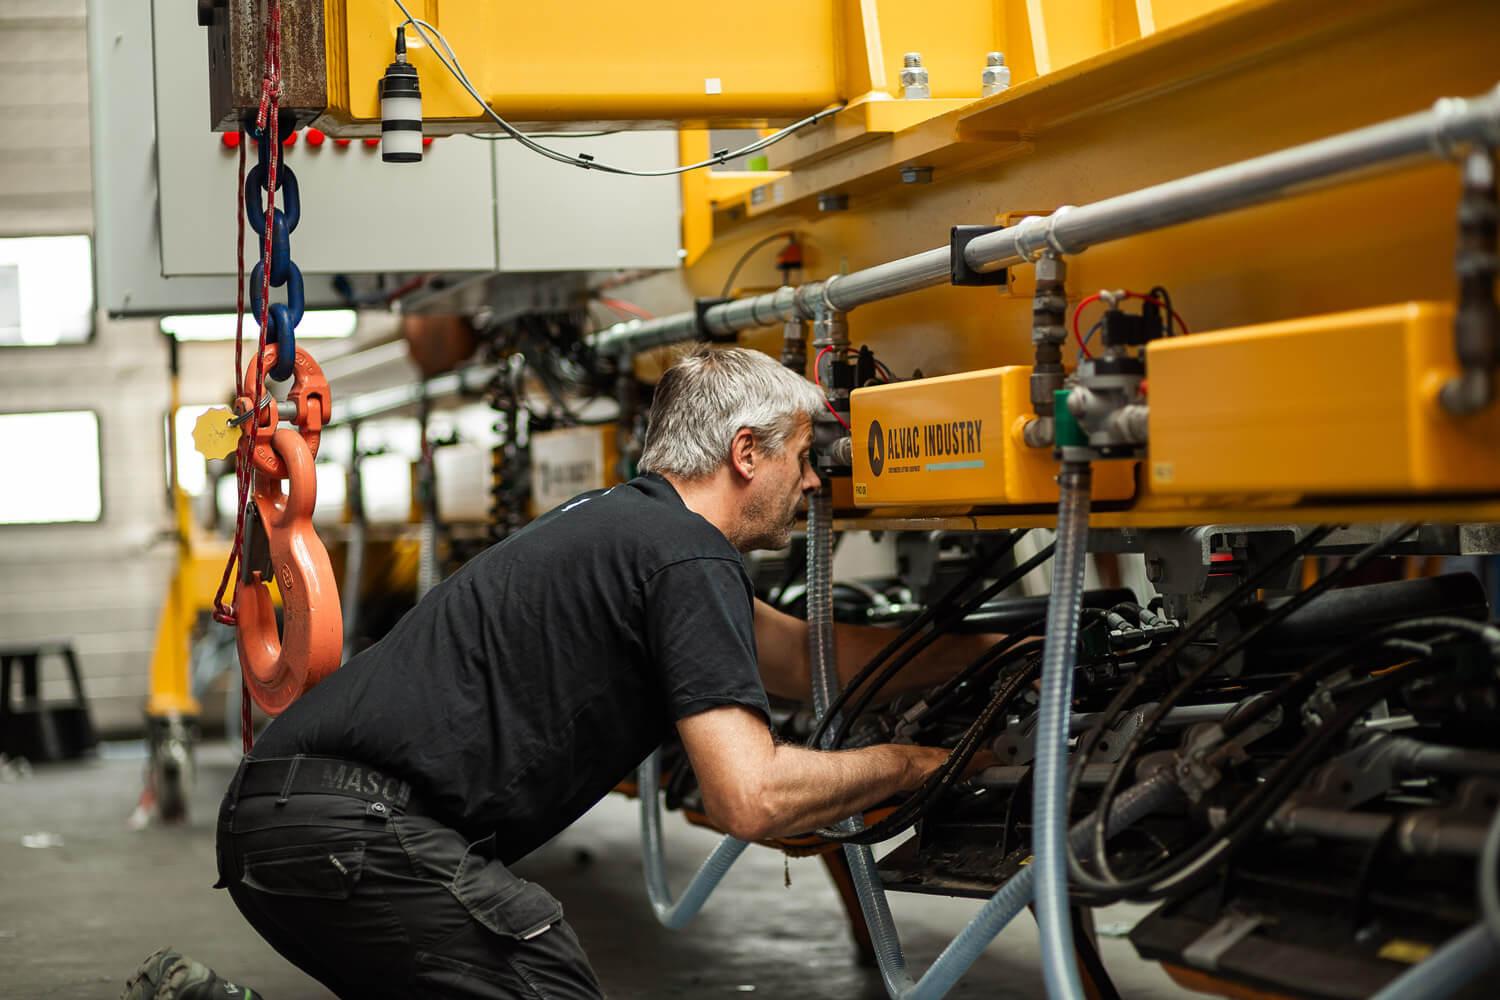 We handle, deliver, assemble and install the blade lifting equipment for you